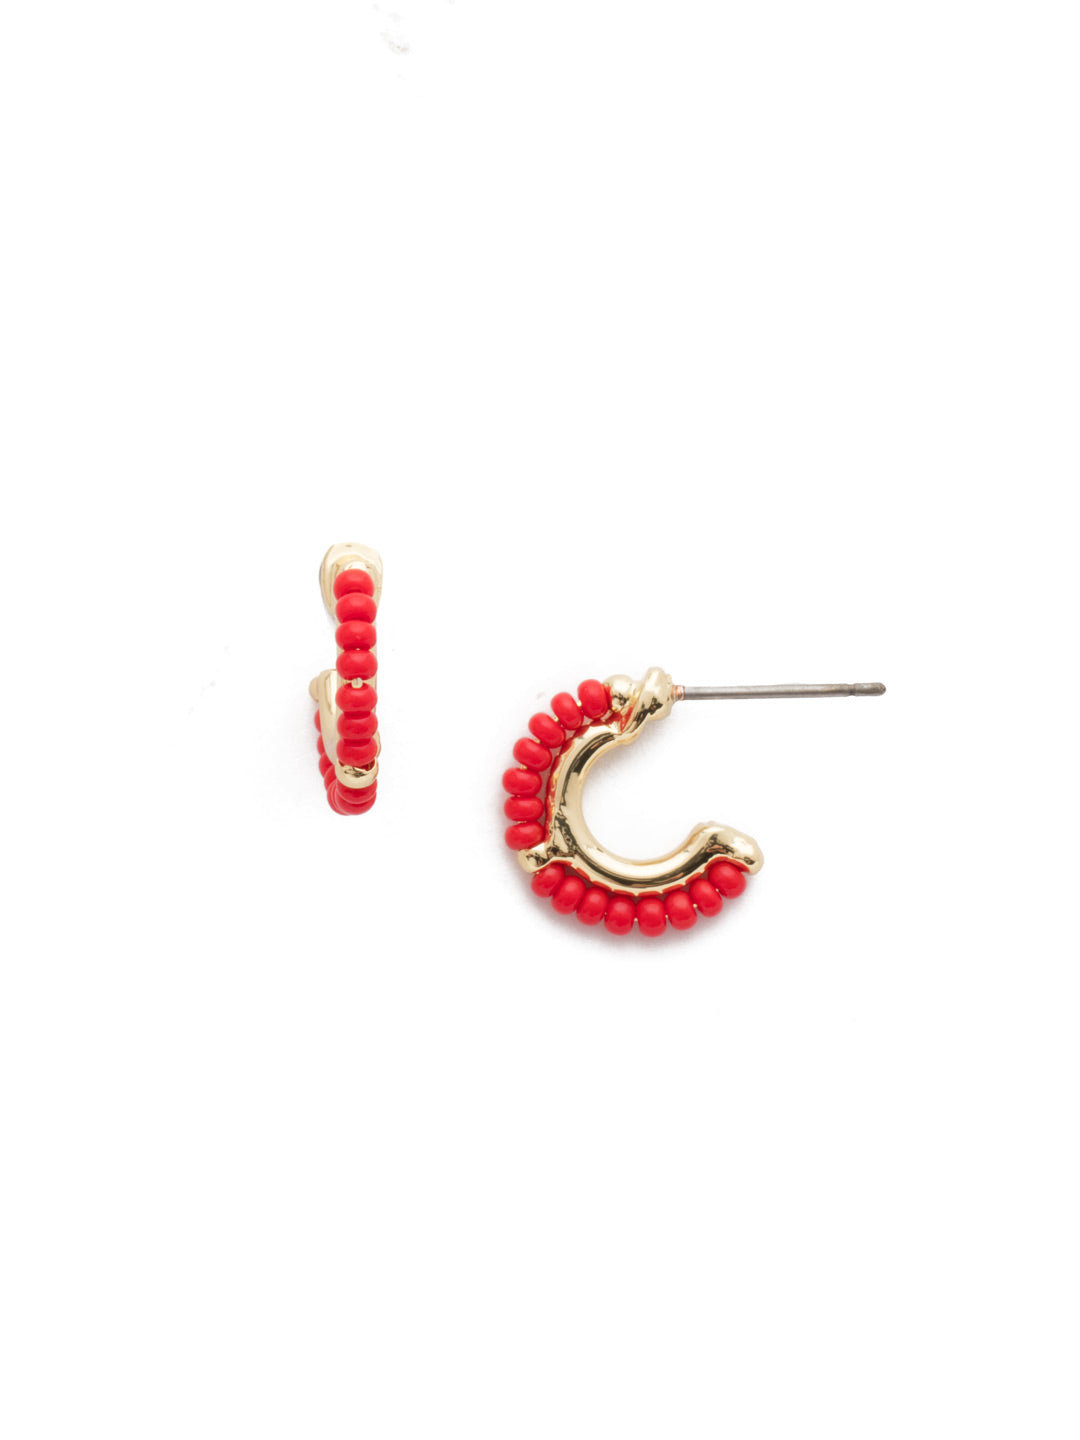 Sunrise Hoop Earring - EEH2BGRCO - Simple yet sophisticated, this pair of post features rings of handcrafted beadwork to perfectly showcase your one-of-a-kind personality. From Sorrelli's Red Coral collection in our Bright Gold-tone finish.